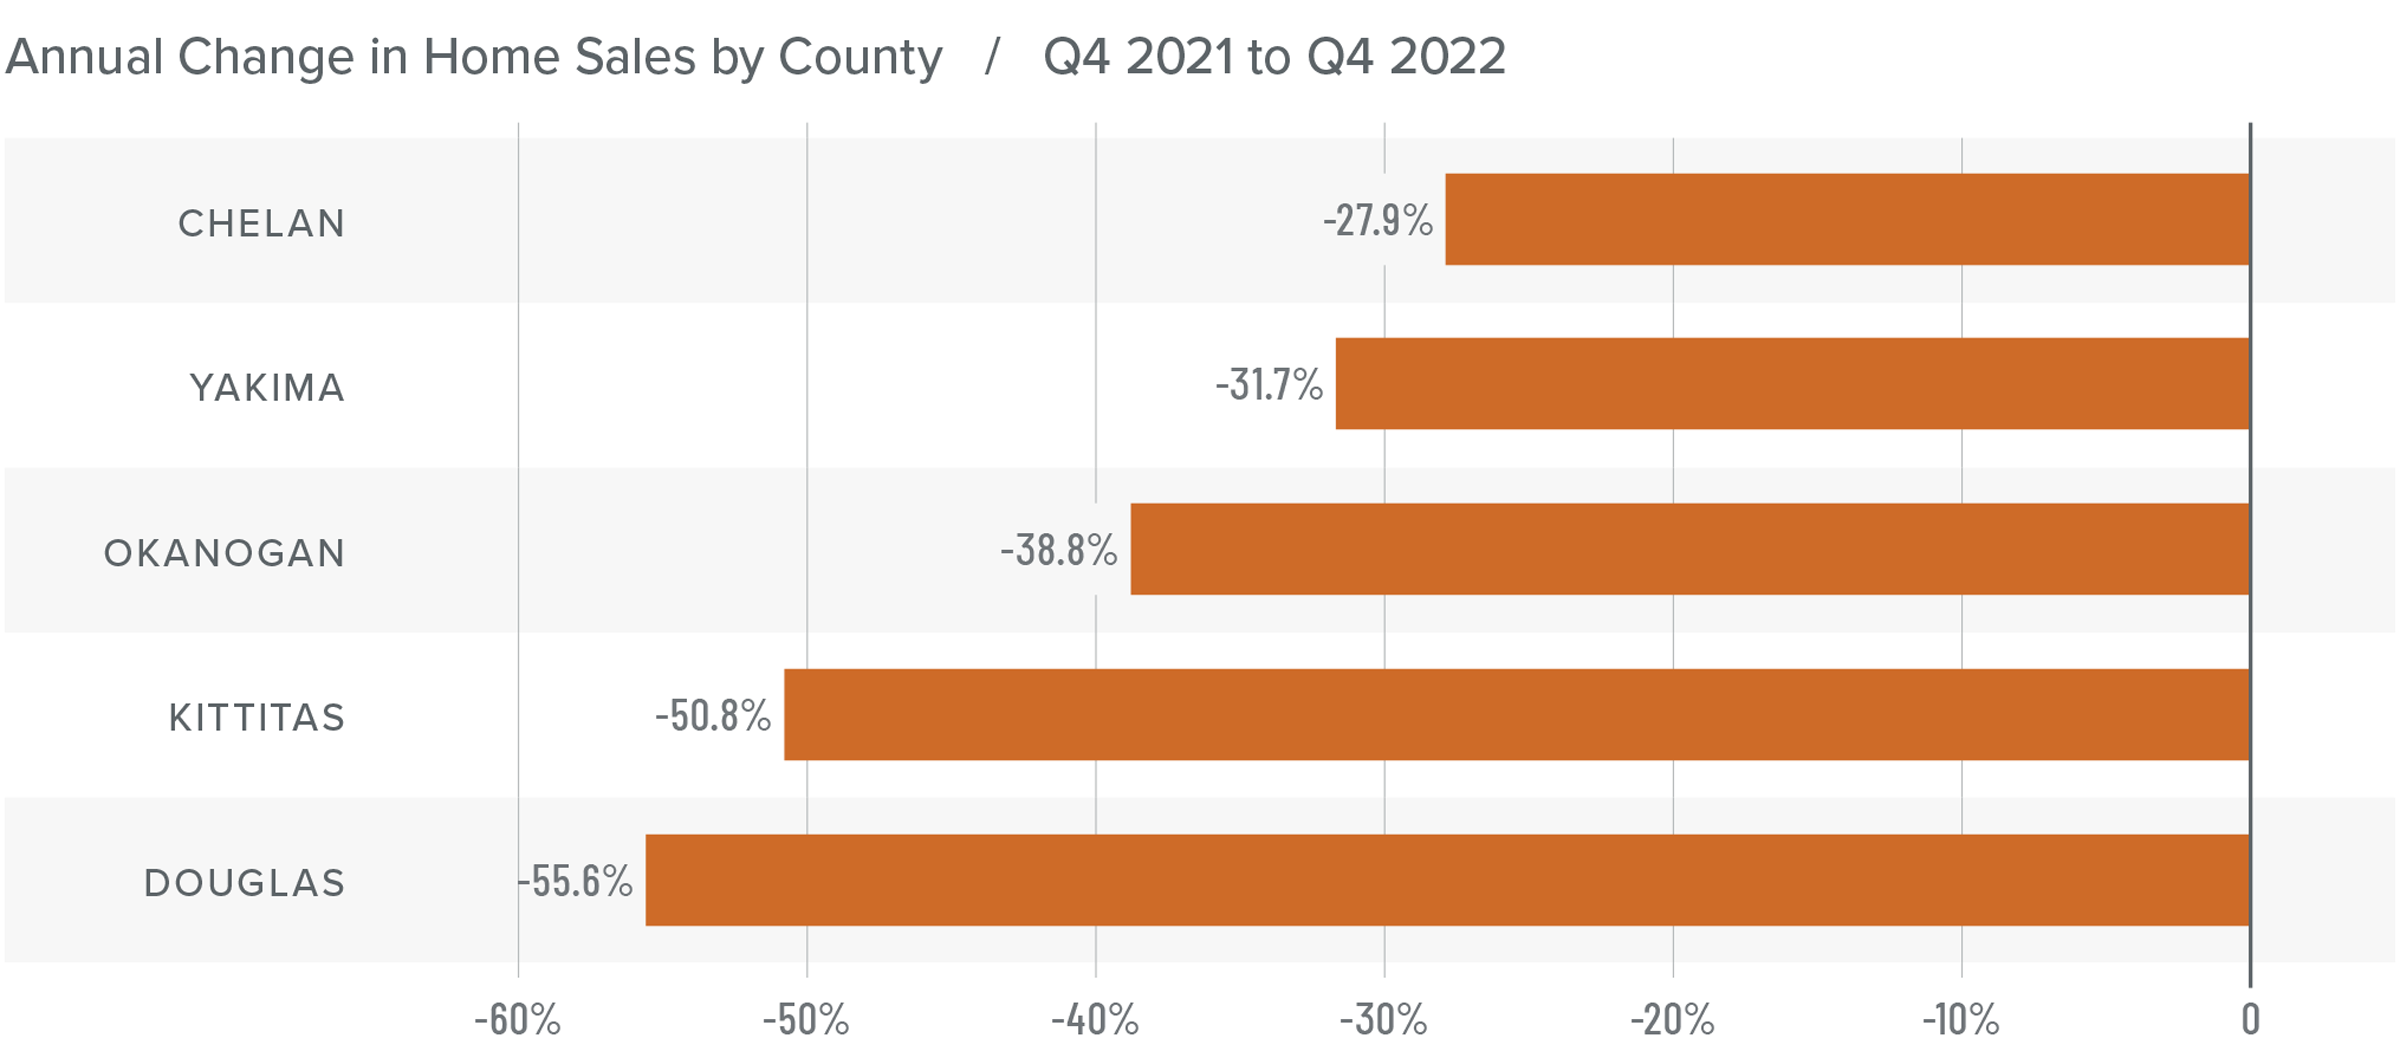 A bar graph showing the annual change in home sales for various counties in Central Washington from Q4 2021 to Q4 2022. All counties have a negative percentage year-over-year change. Here are the totals: Chelan at -27.9%, Yakima at -31.7%, Okanogan -38.8%, Kittitas -50.8%, and Douglas -55.6%.